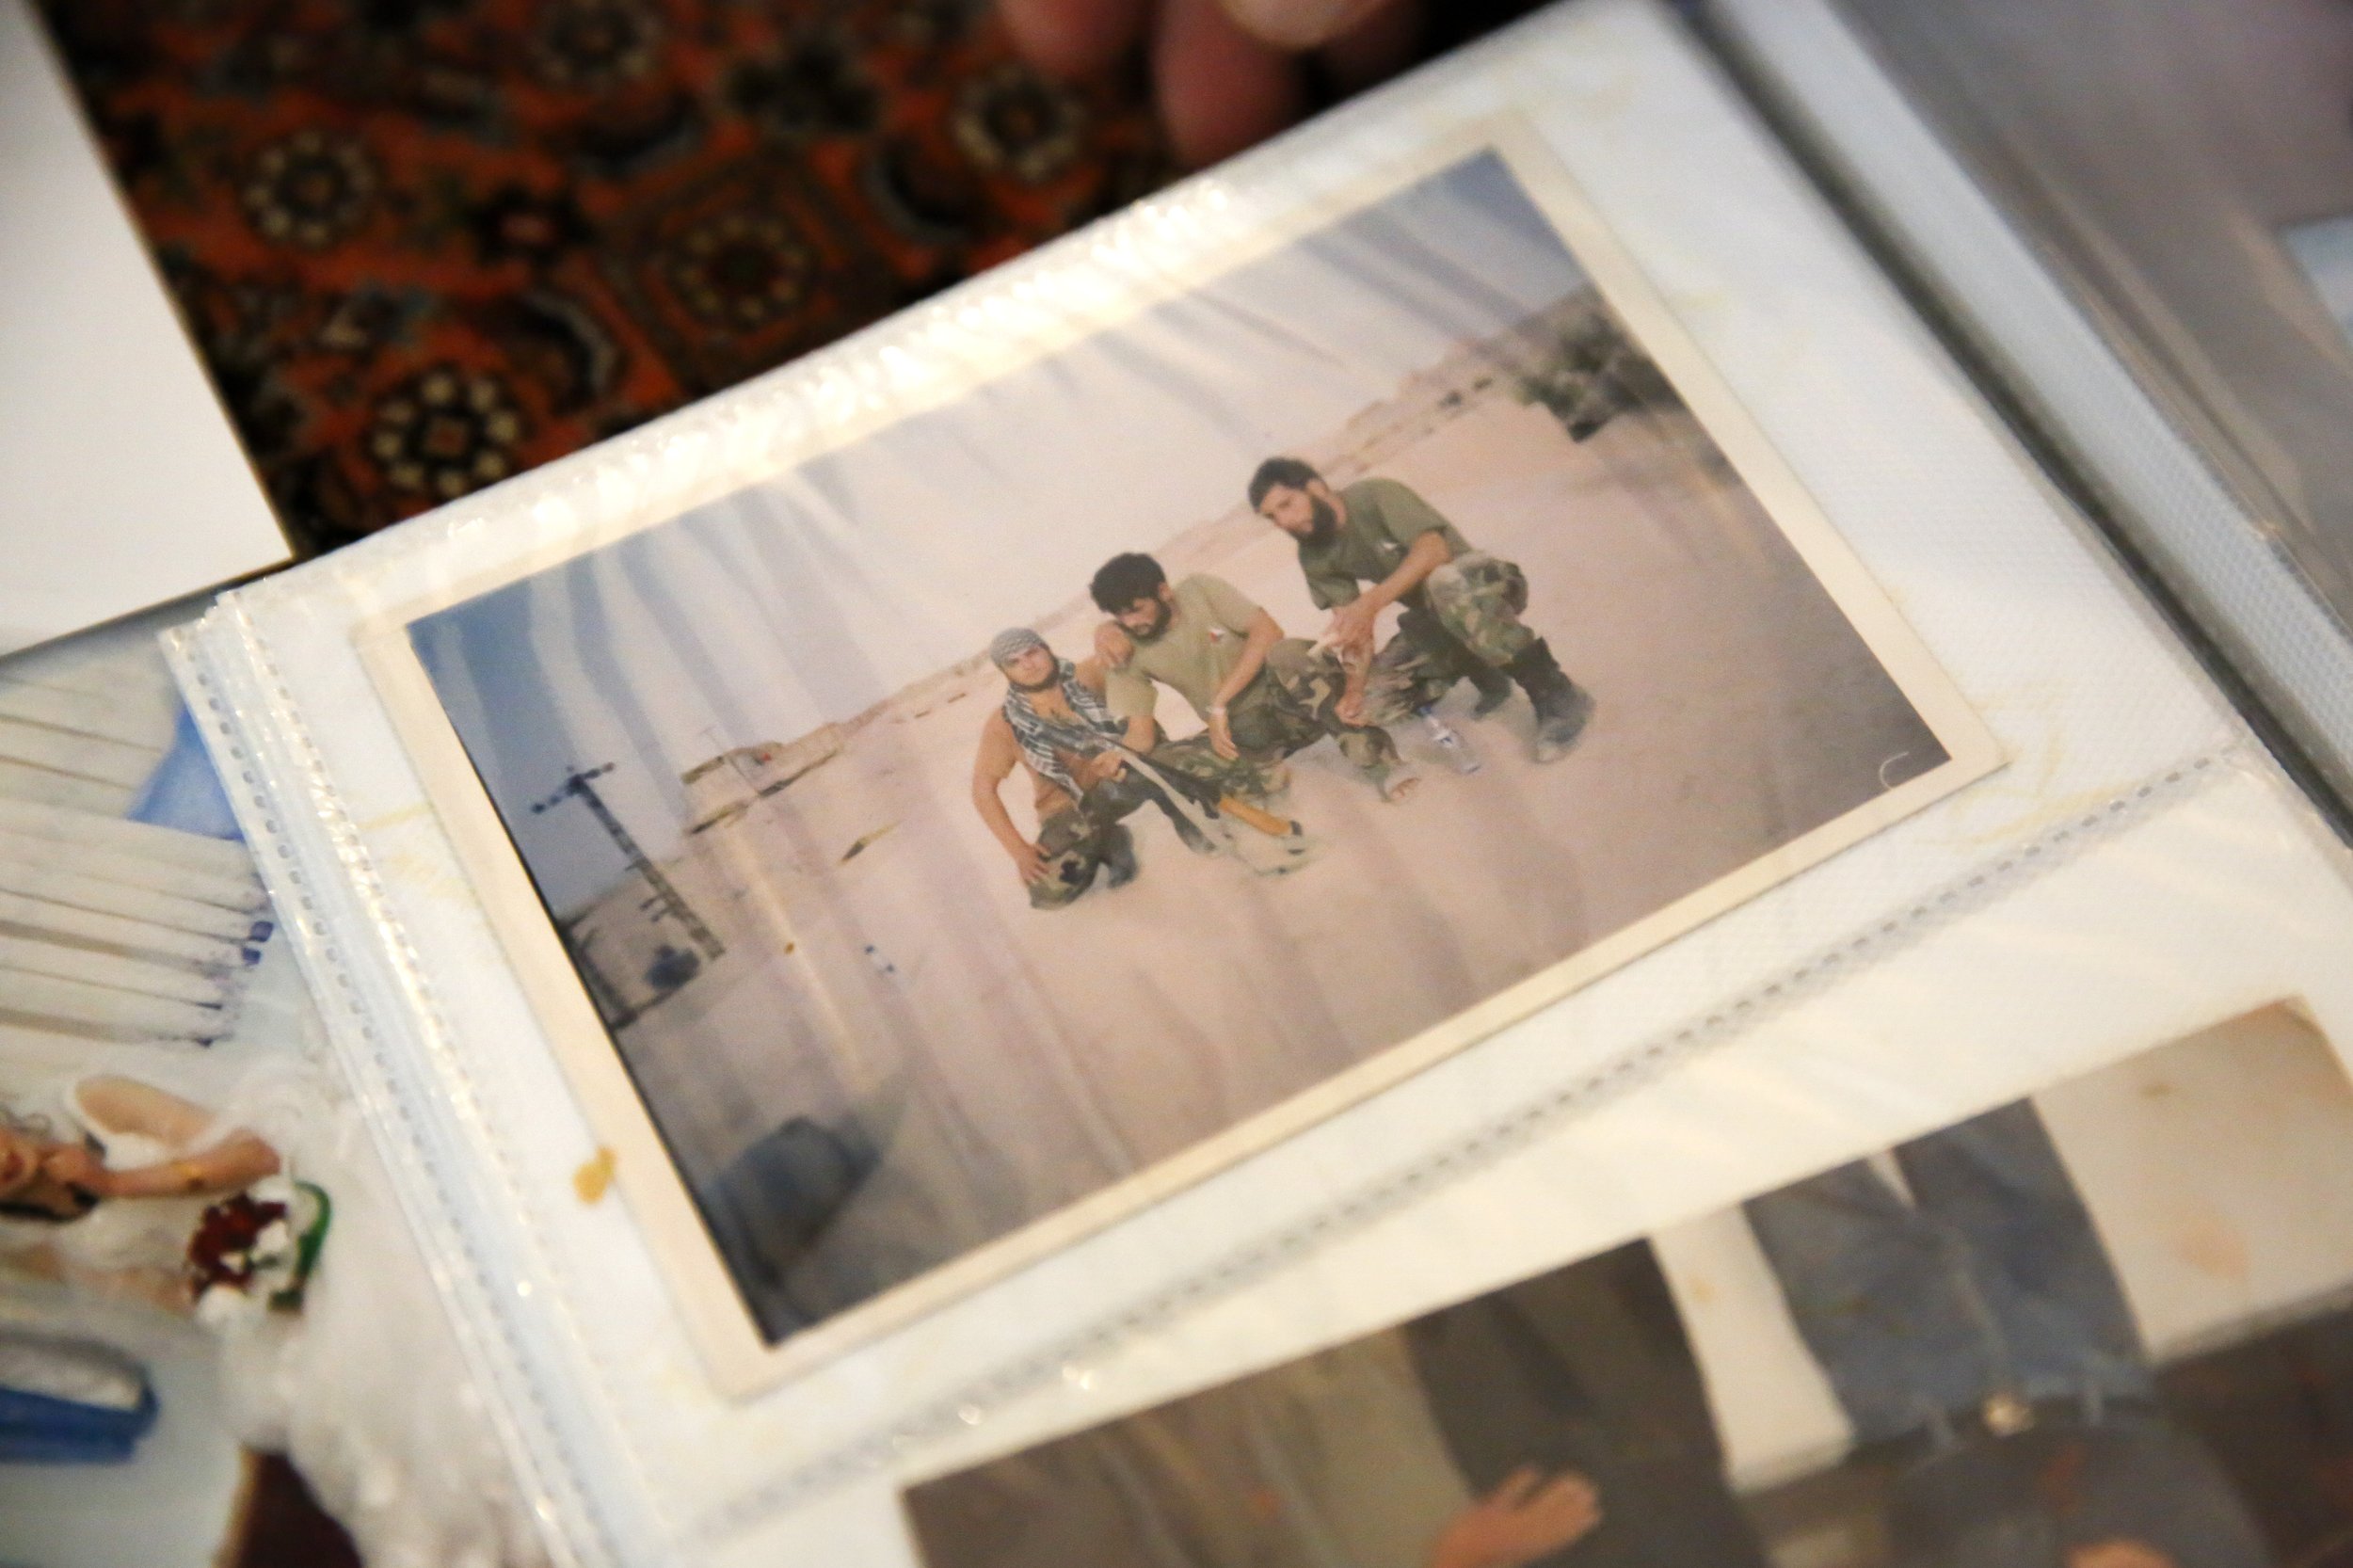  A photo of Najibullah Mohammadi and two of his military team members is seen in a family photo album at the Mohammadi’s home in Sacramento, Calif. on Sunday, September 12, 2021. Najibullah Mohammadi, his wife Susan, their two young children Zahra an